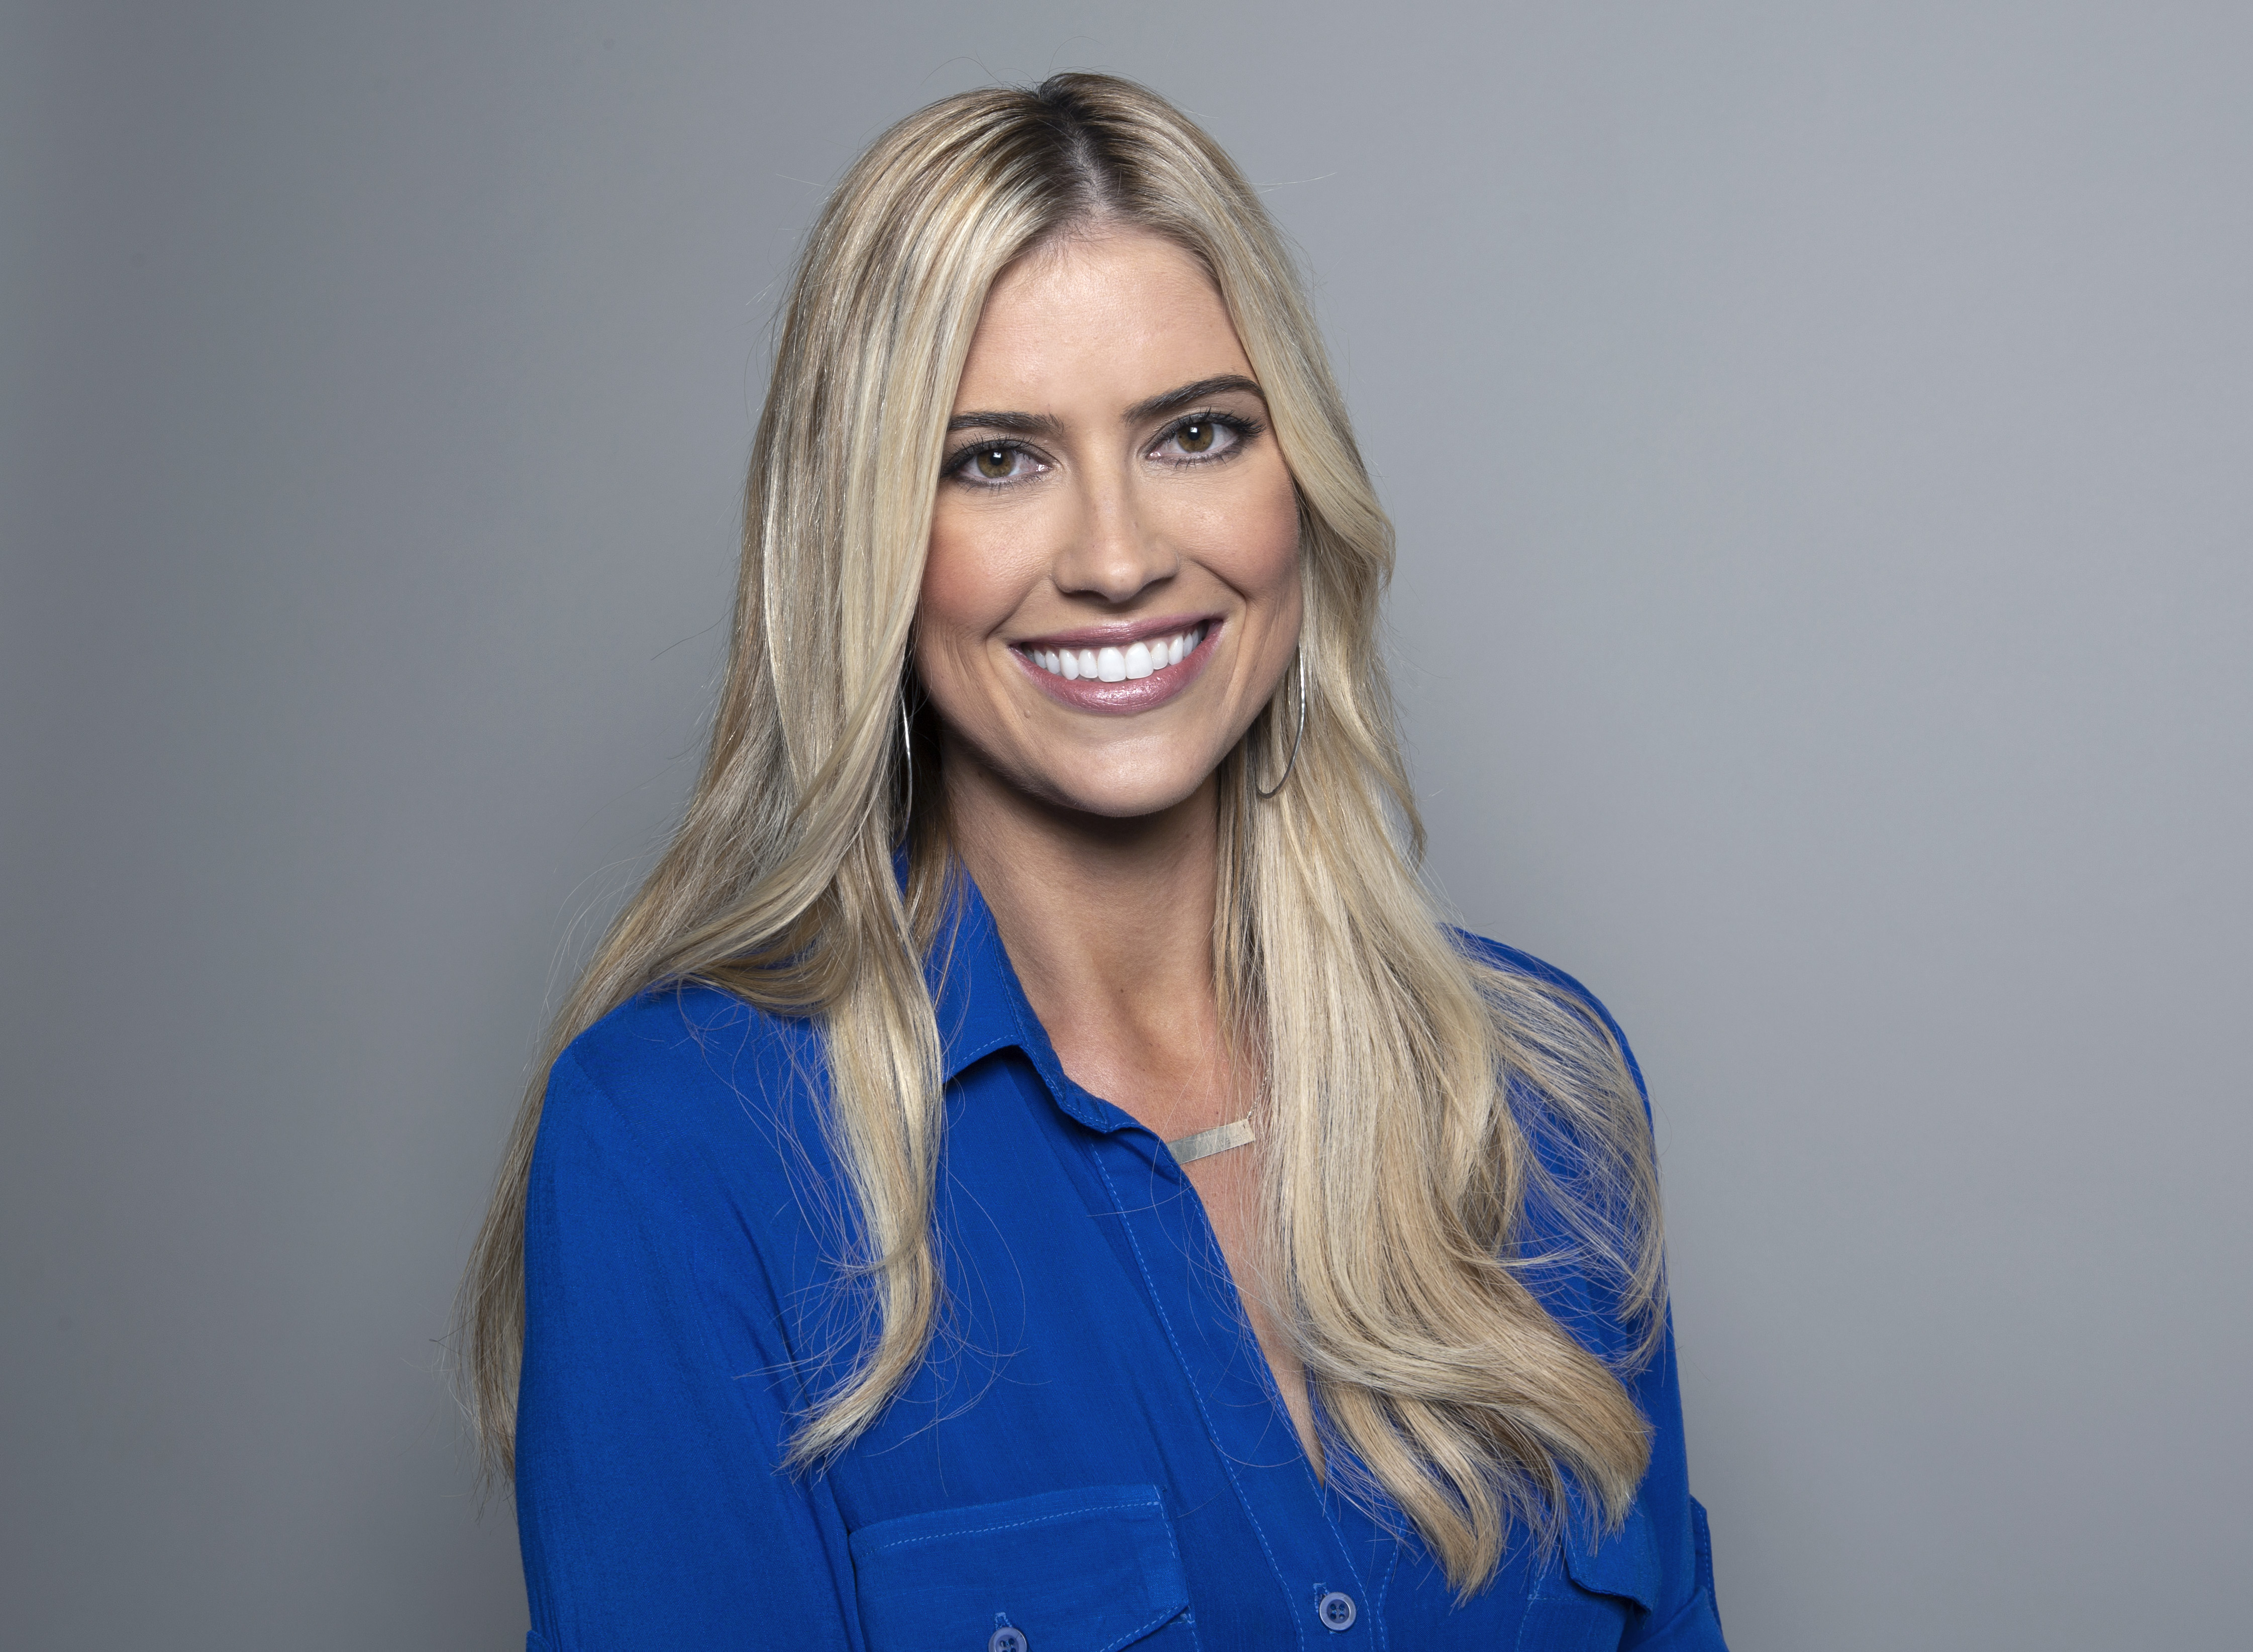 Fans of Christina Anstead Give Support After She Posts Some Emotional Poems